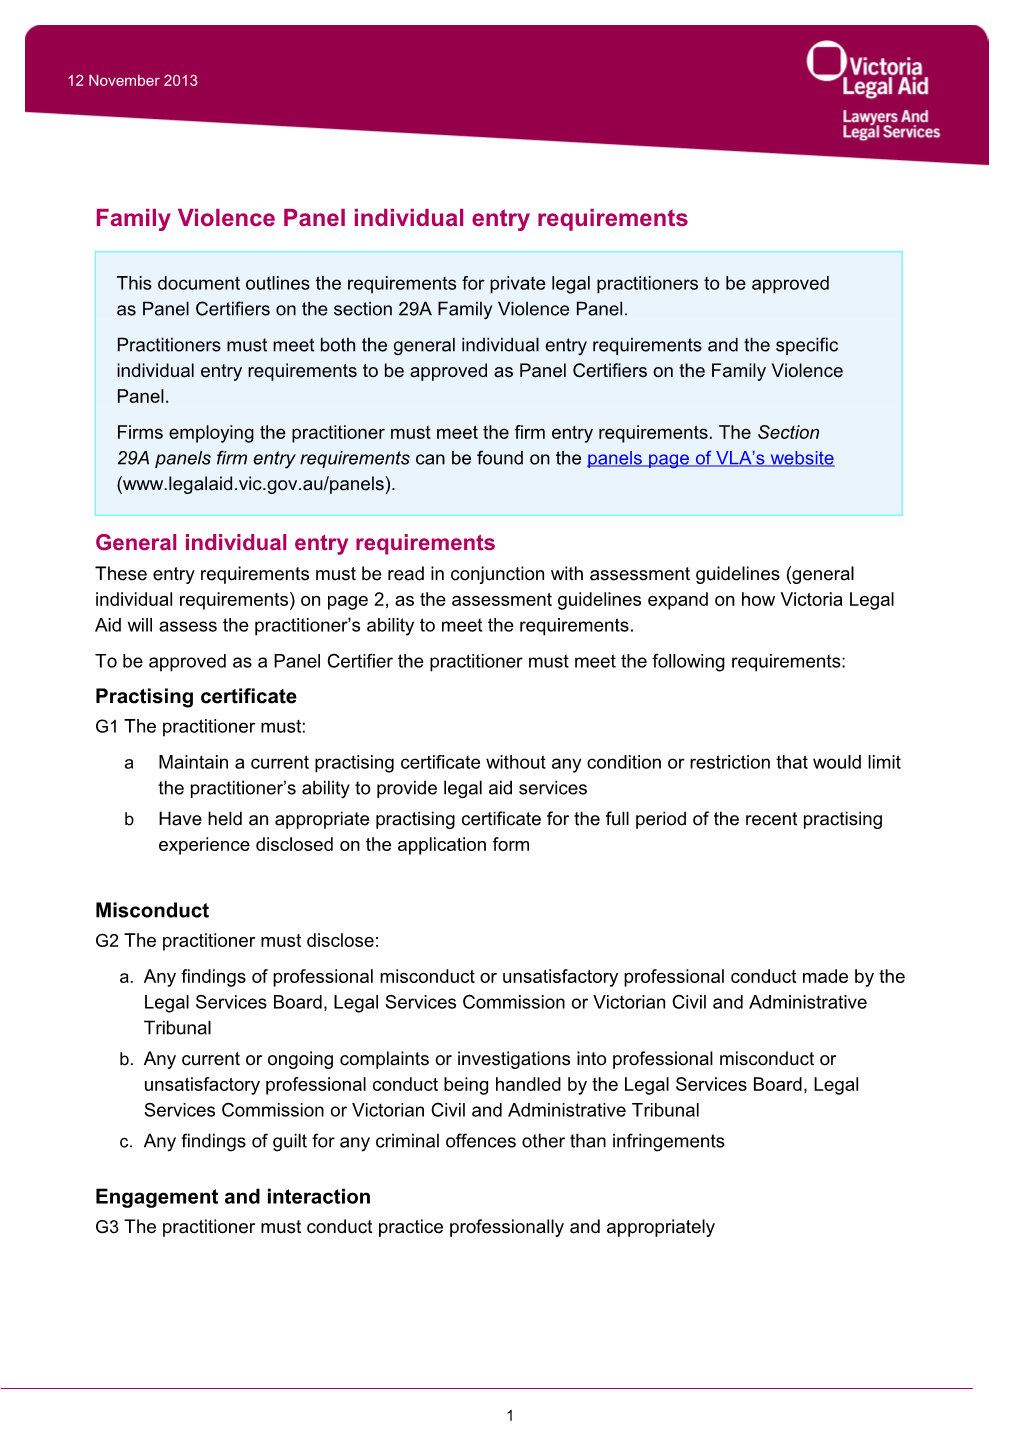 Family Violence Panel Individual Entry Requirements